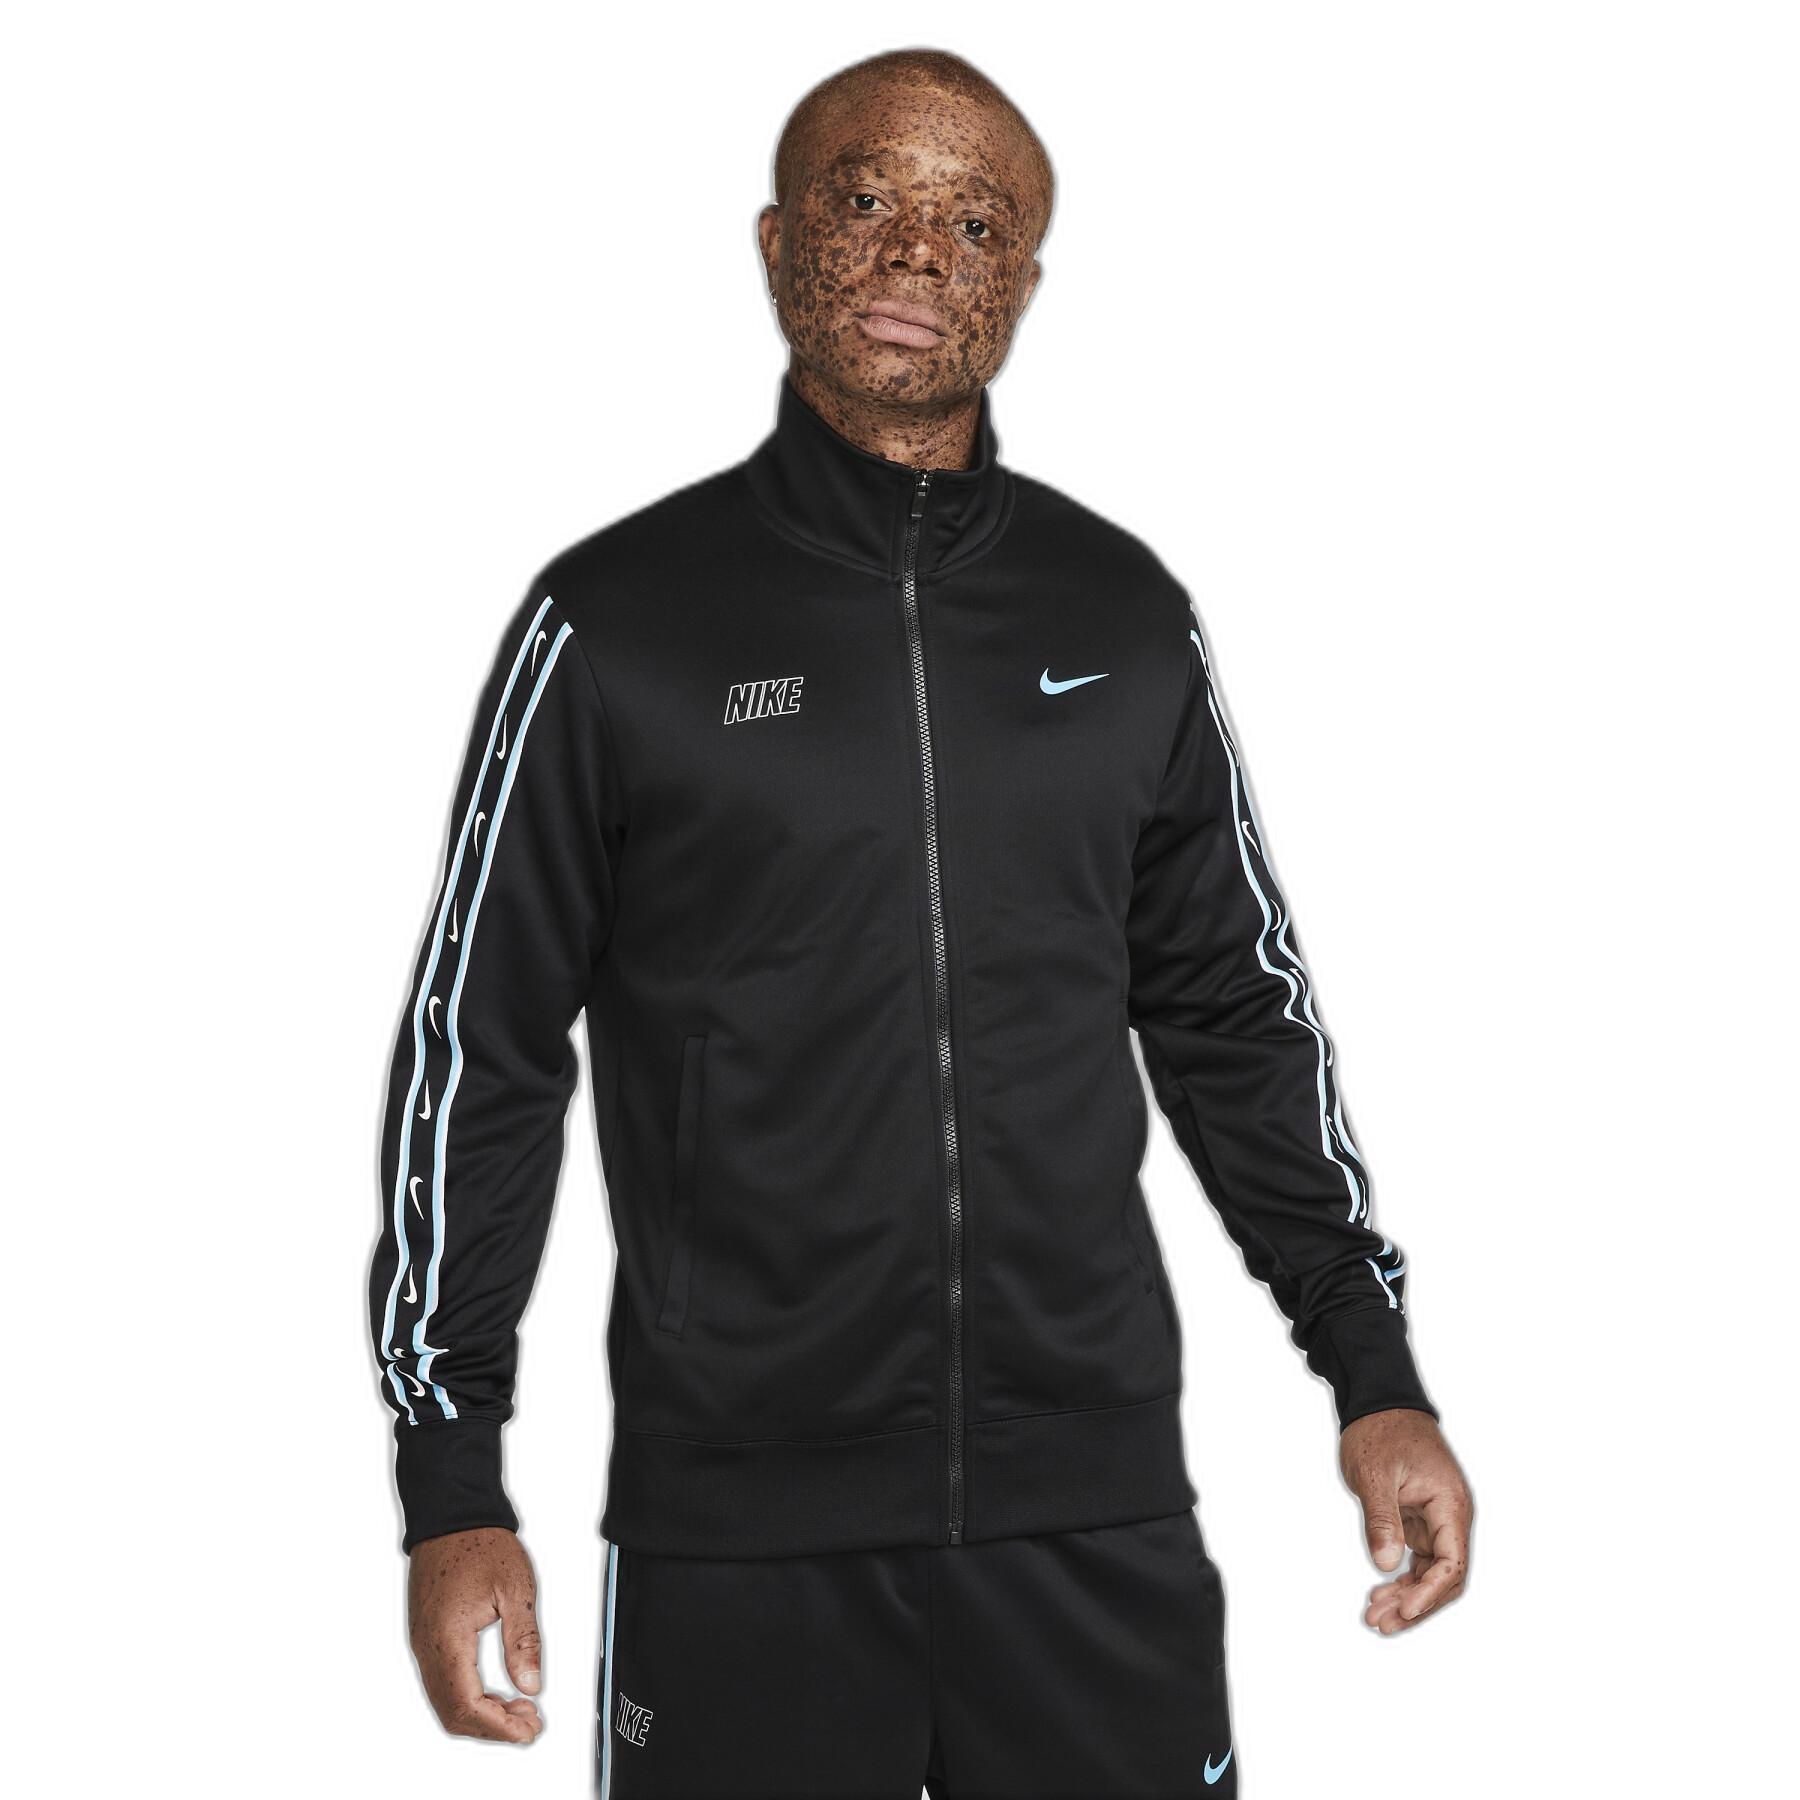 Track suit jas Nike Repeat Polyknit